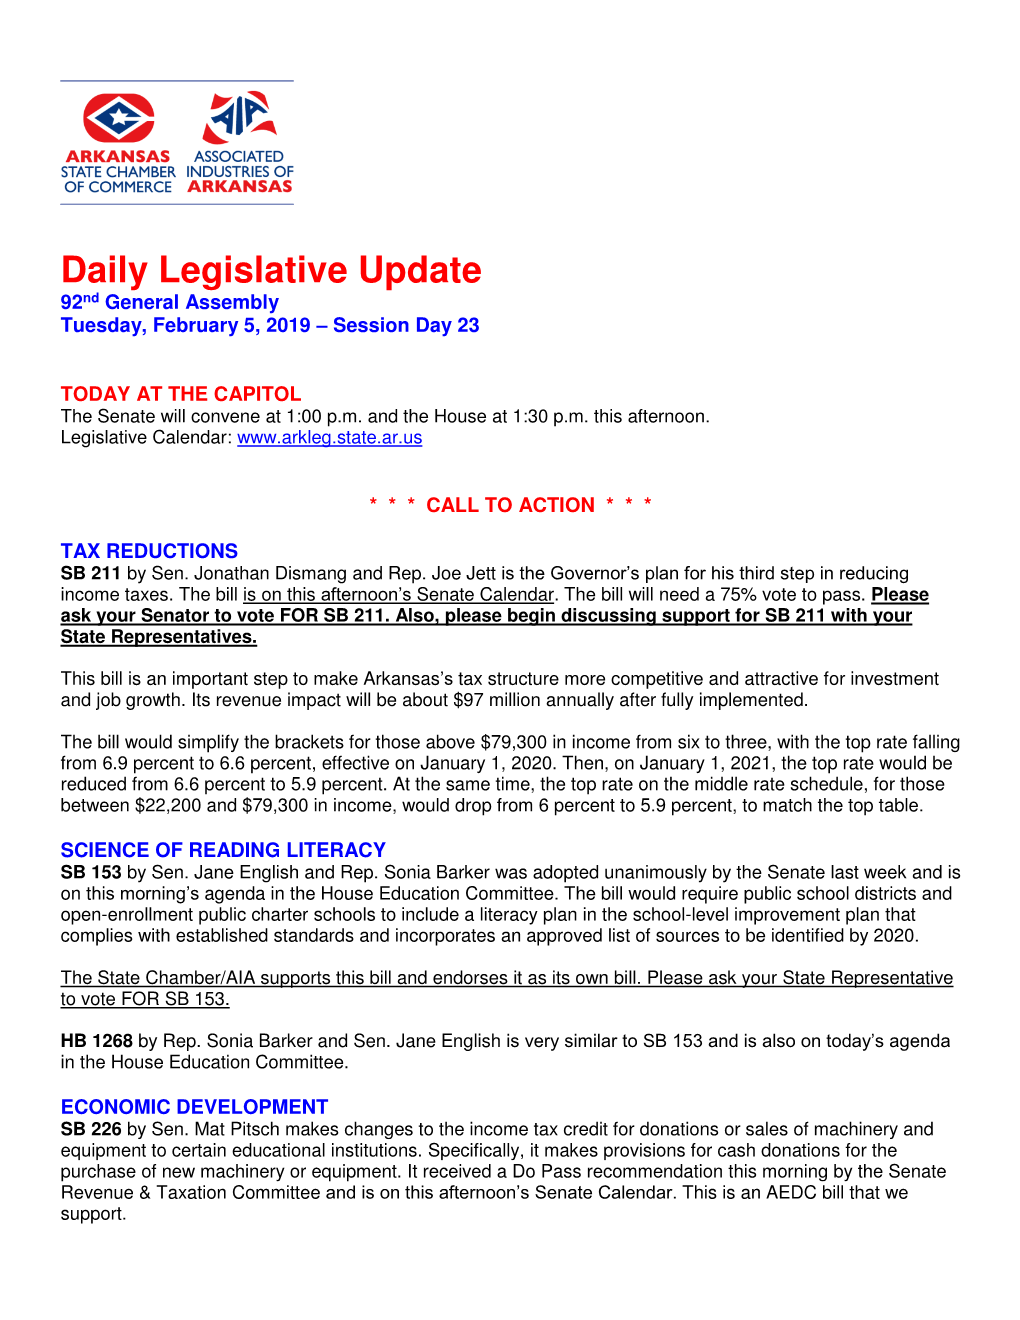 Daily Legislative Update 92Nd General Assembly Tuesday, February 5, 2019 – Session Day 23